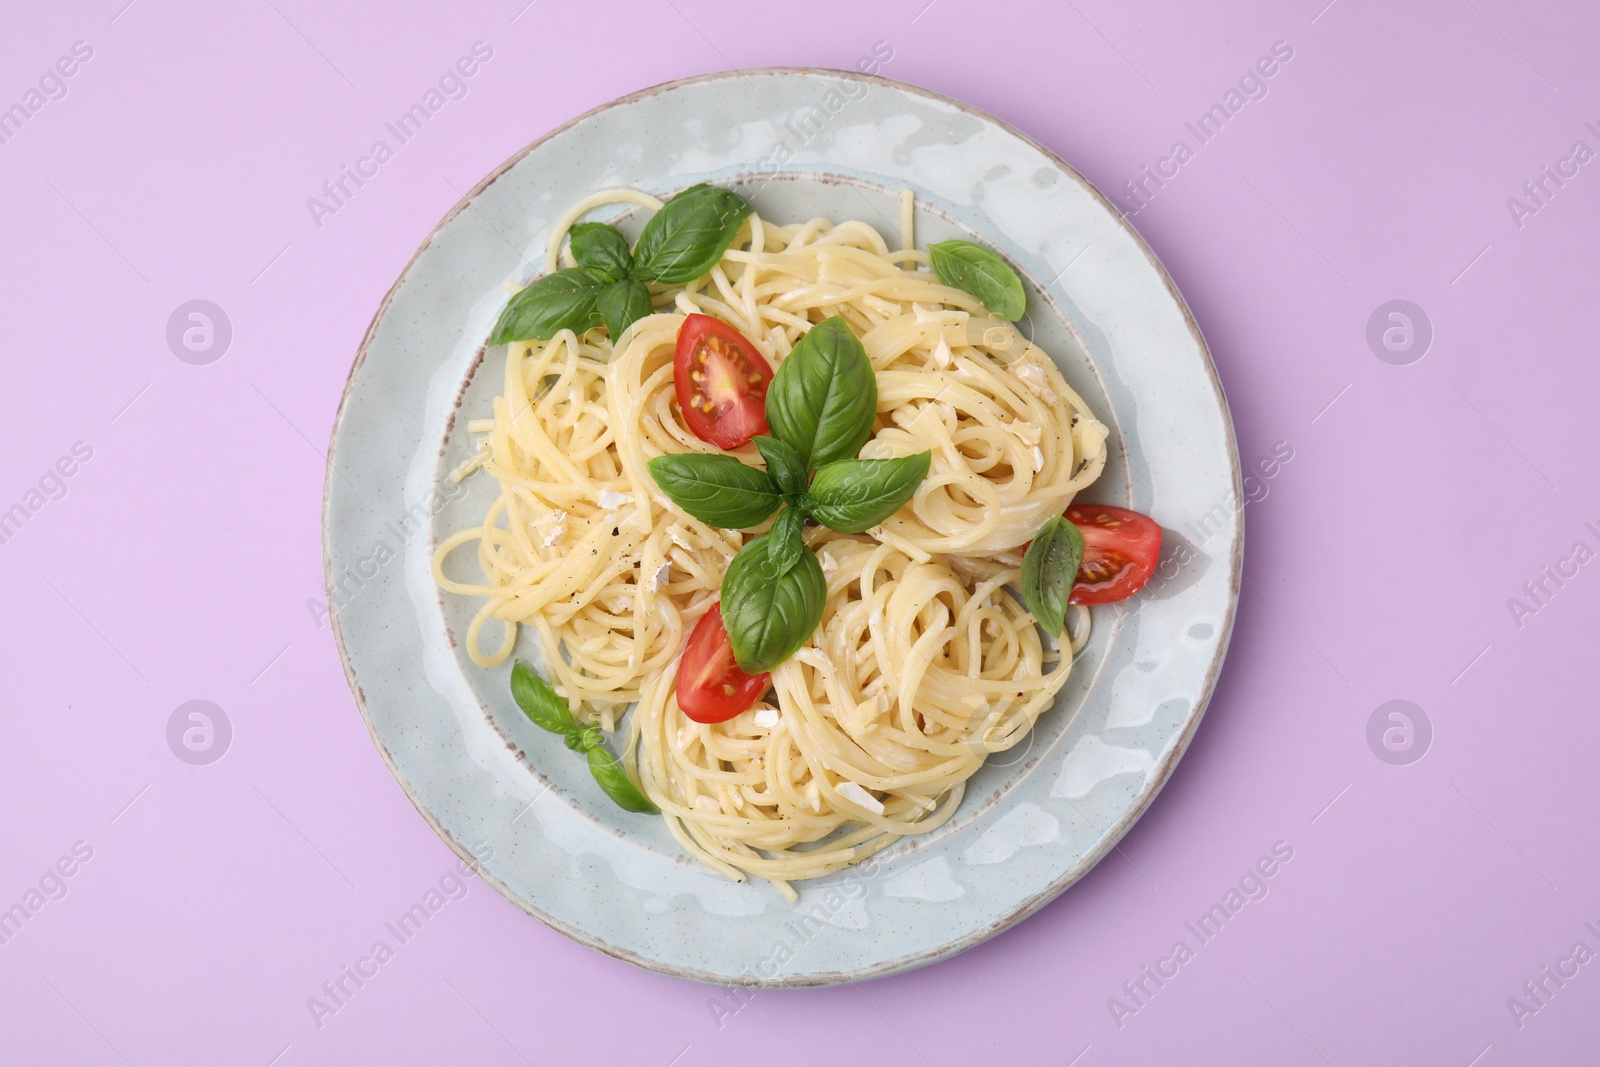 Photo of Delicious pasta with brie cheese, tomatoes and basil leaves on violet background, top view